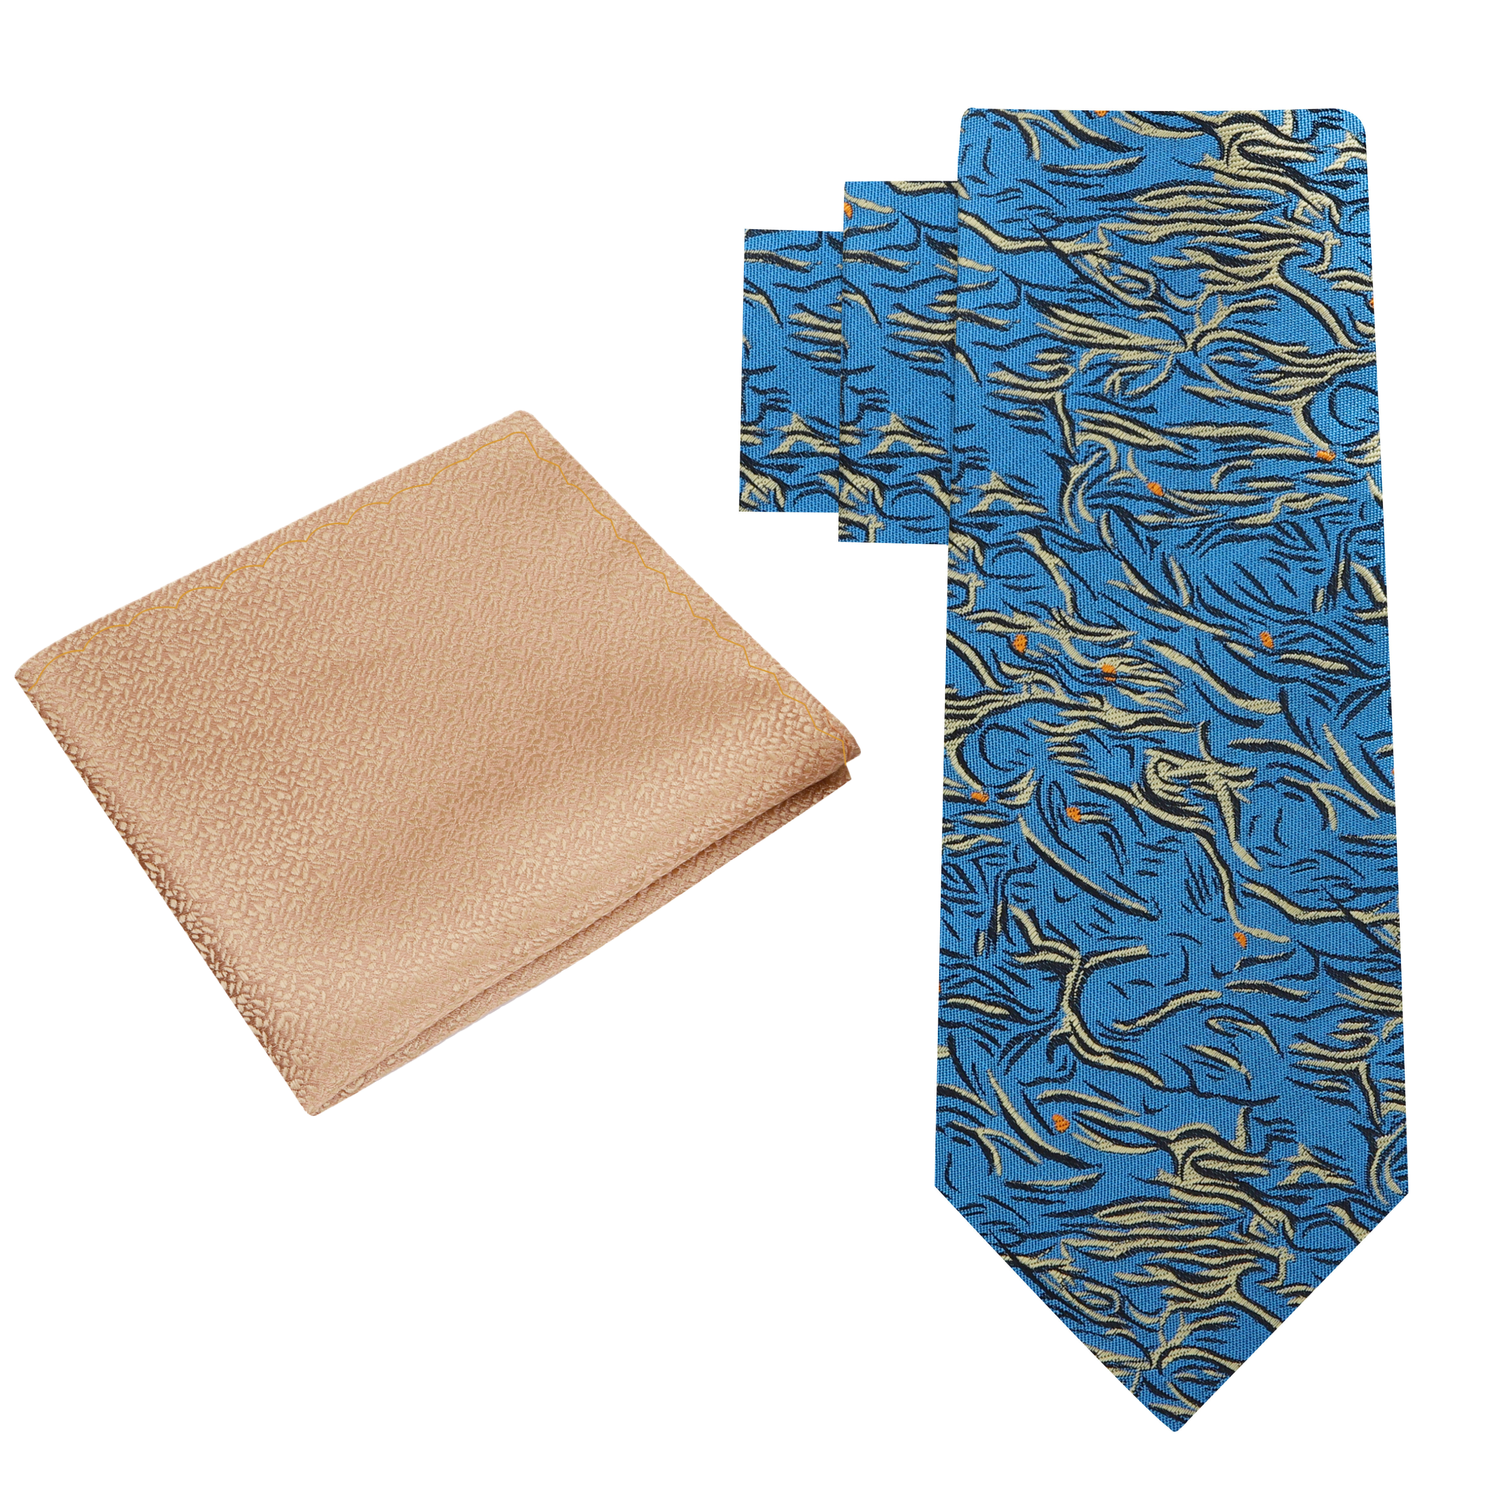 Alt View: Teal, Pale Gold and Orange Abstract Necktie with Light Gold Square